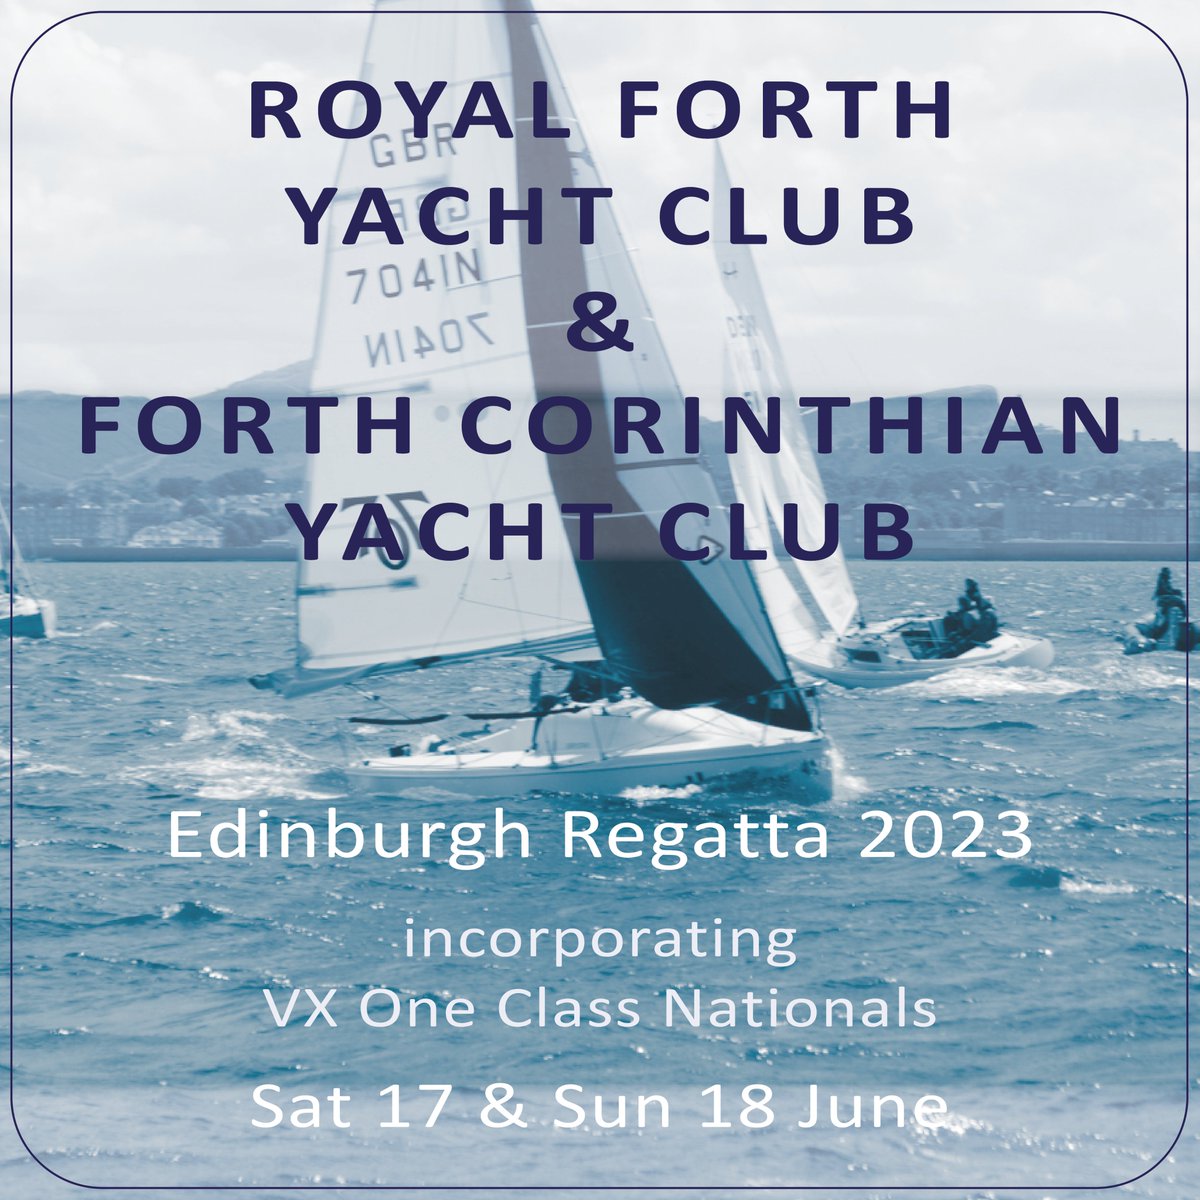 THIS WEEKEND! ⛵️
The #EdinburghRegatta is a collaboration between the two neighbouring yacht clubs at #GrantonHarbour, @RoyalForthYC & @ForthCorinthians.
Enjoy, whether you are participating, organising, mucking in or watching from shore, & good luck to all our hardy competitors!